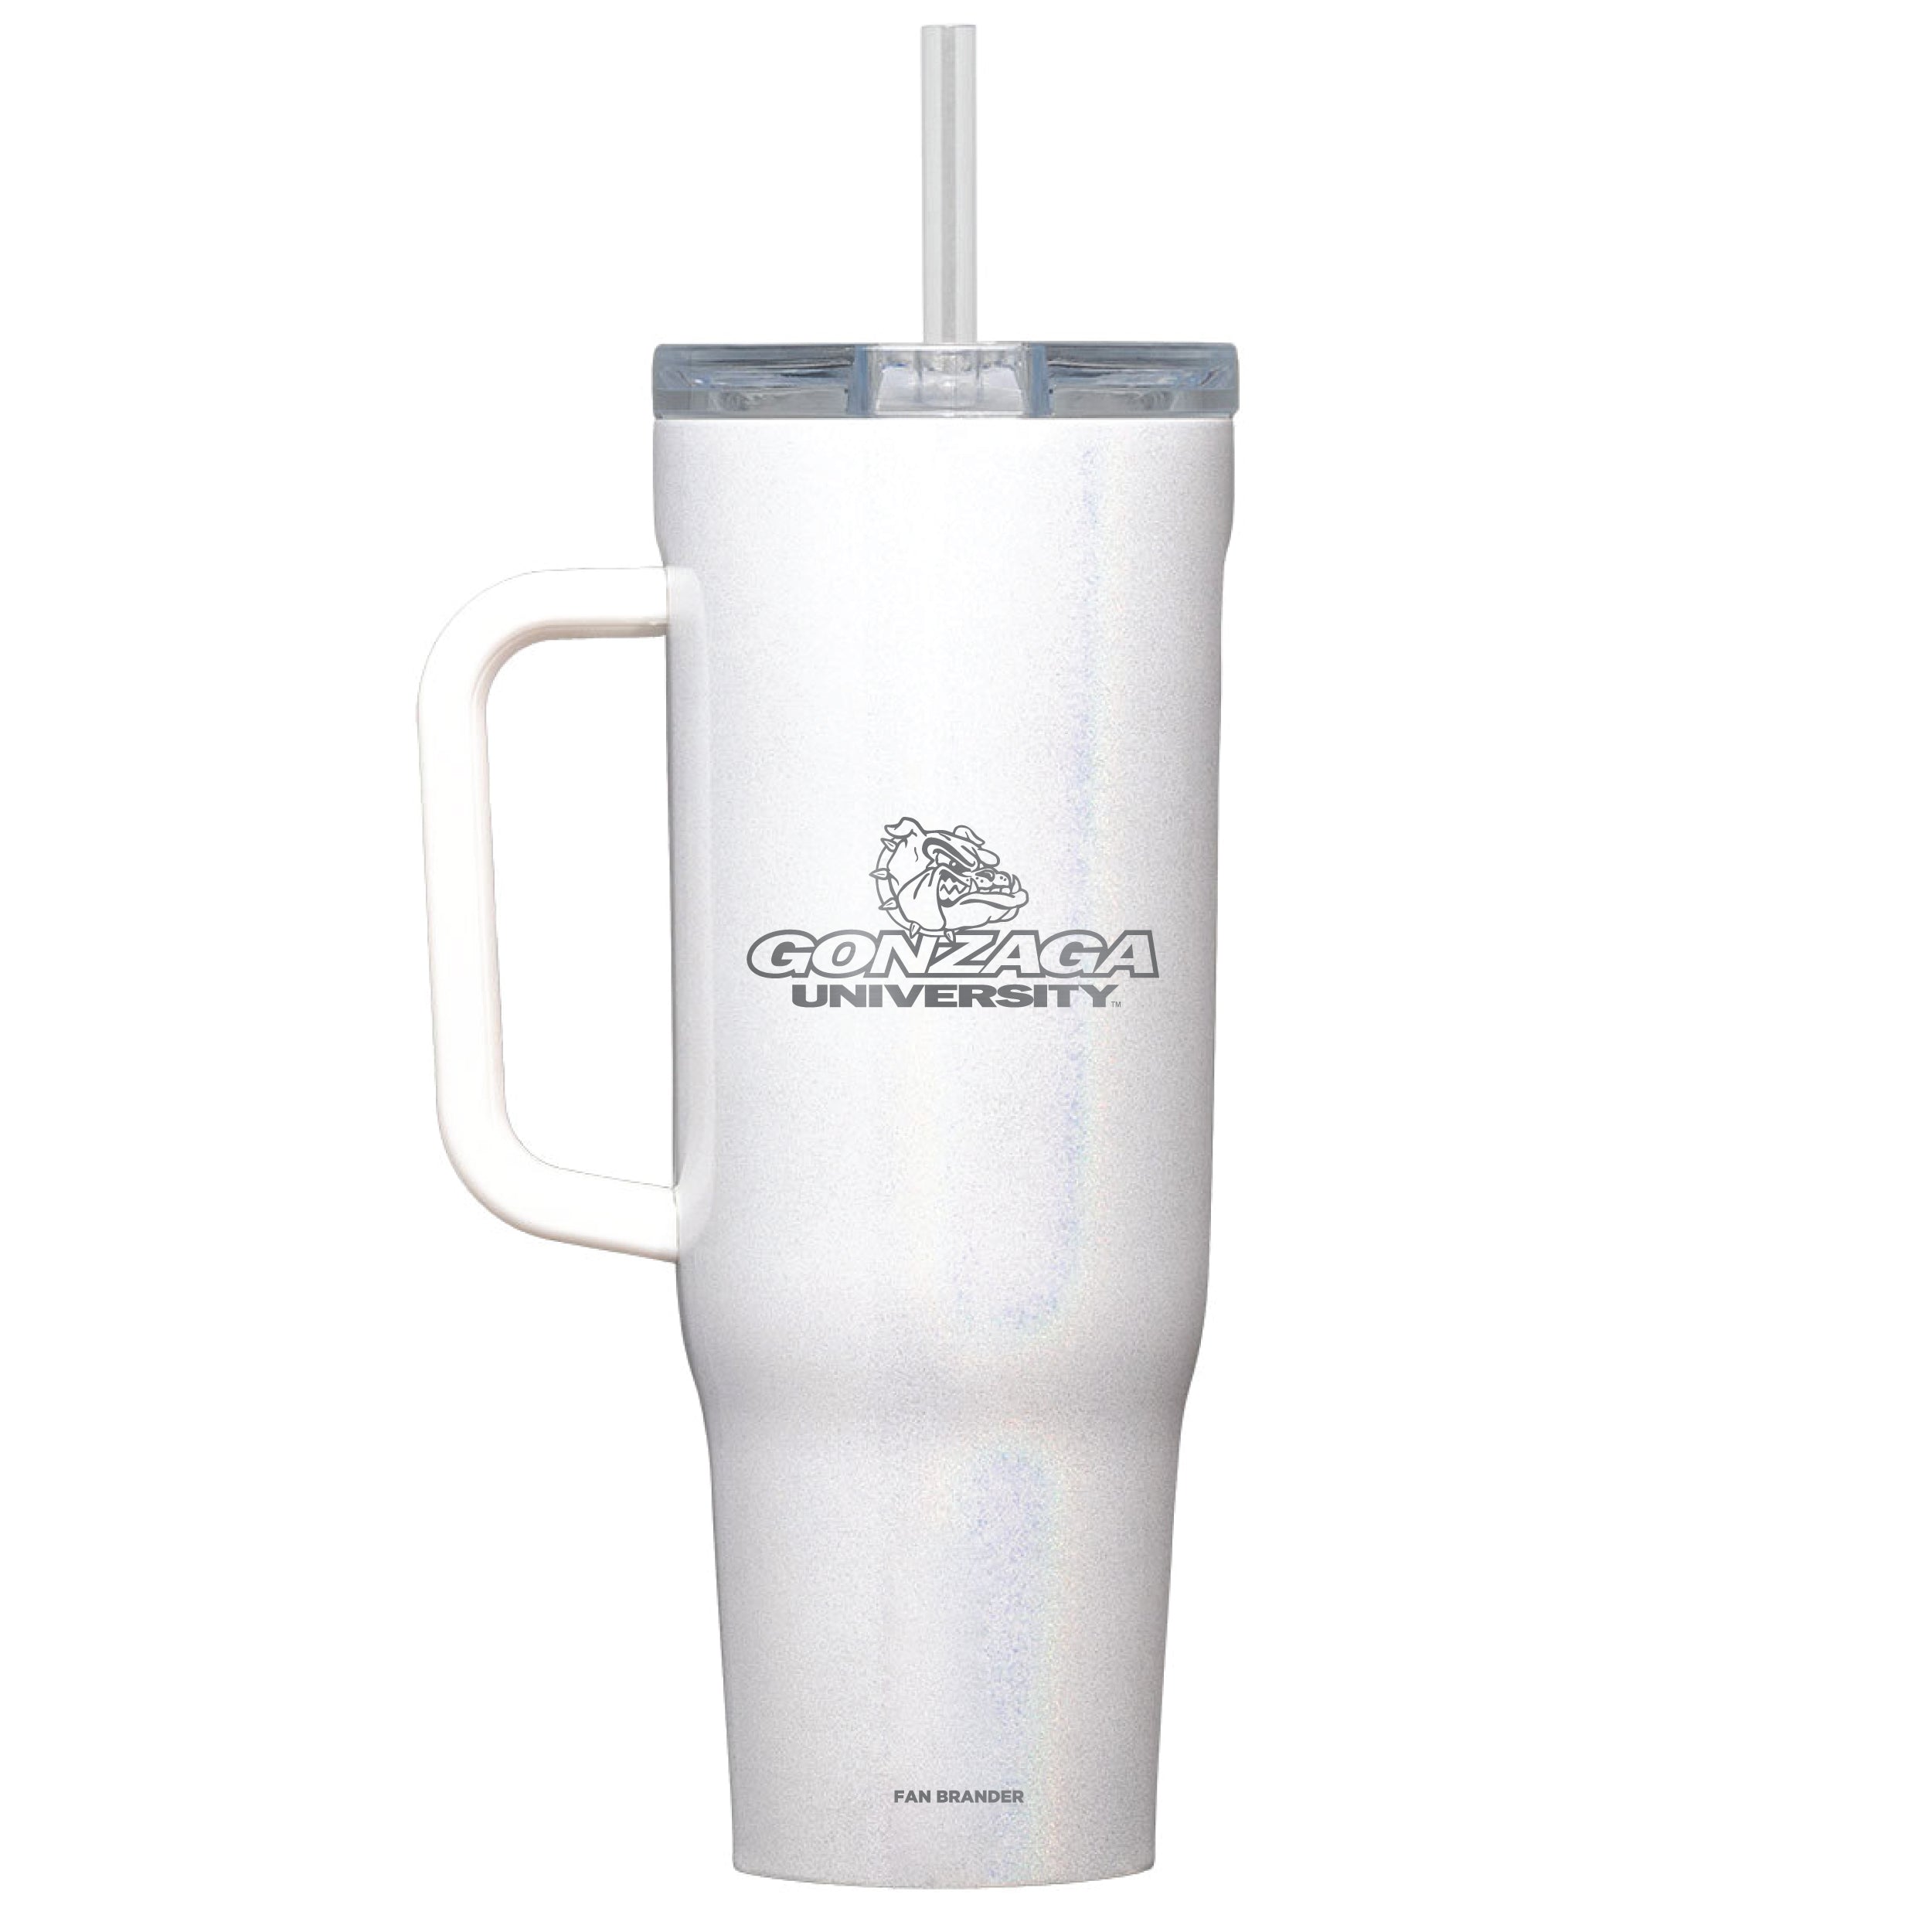 Corkcicle Cruiser 40oz Tumbler with Gonzaga Bulldogs Etched Primary Logo